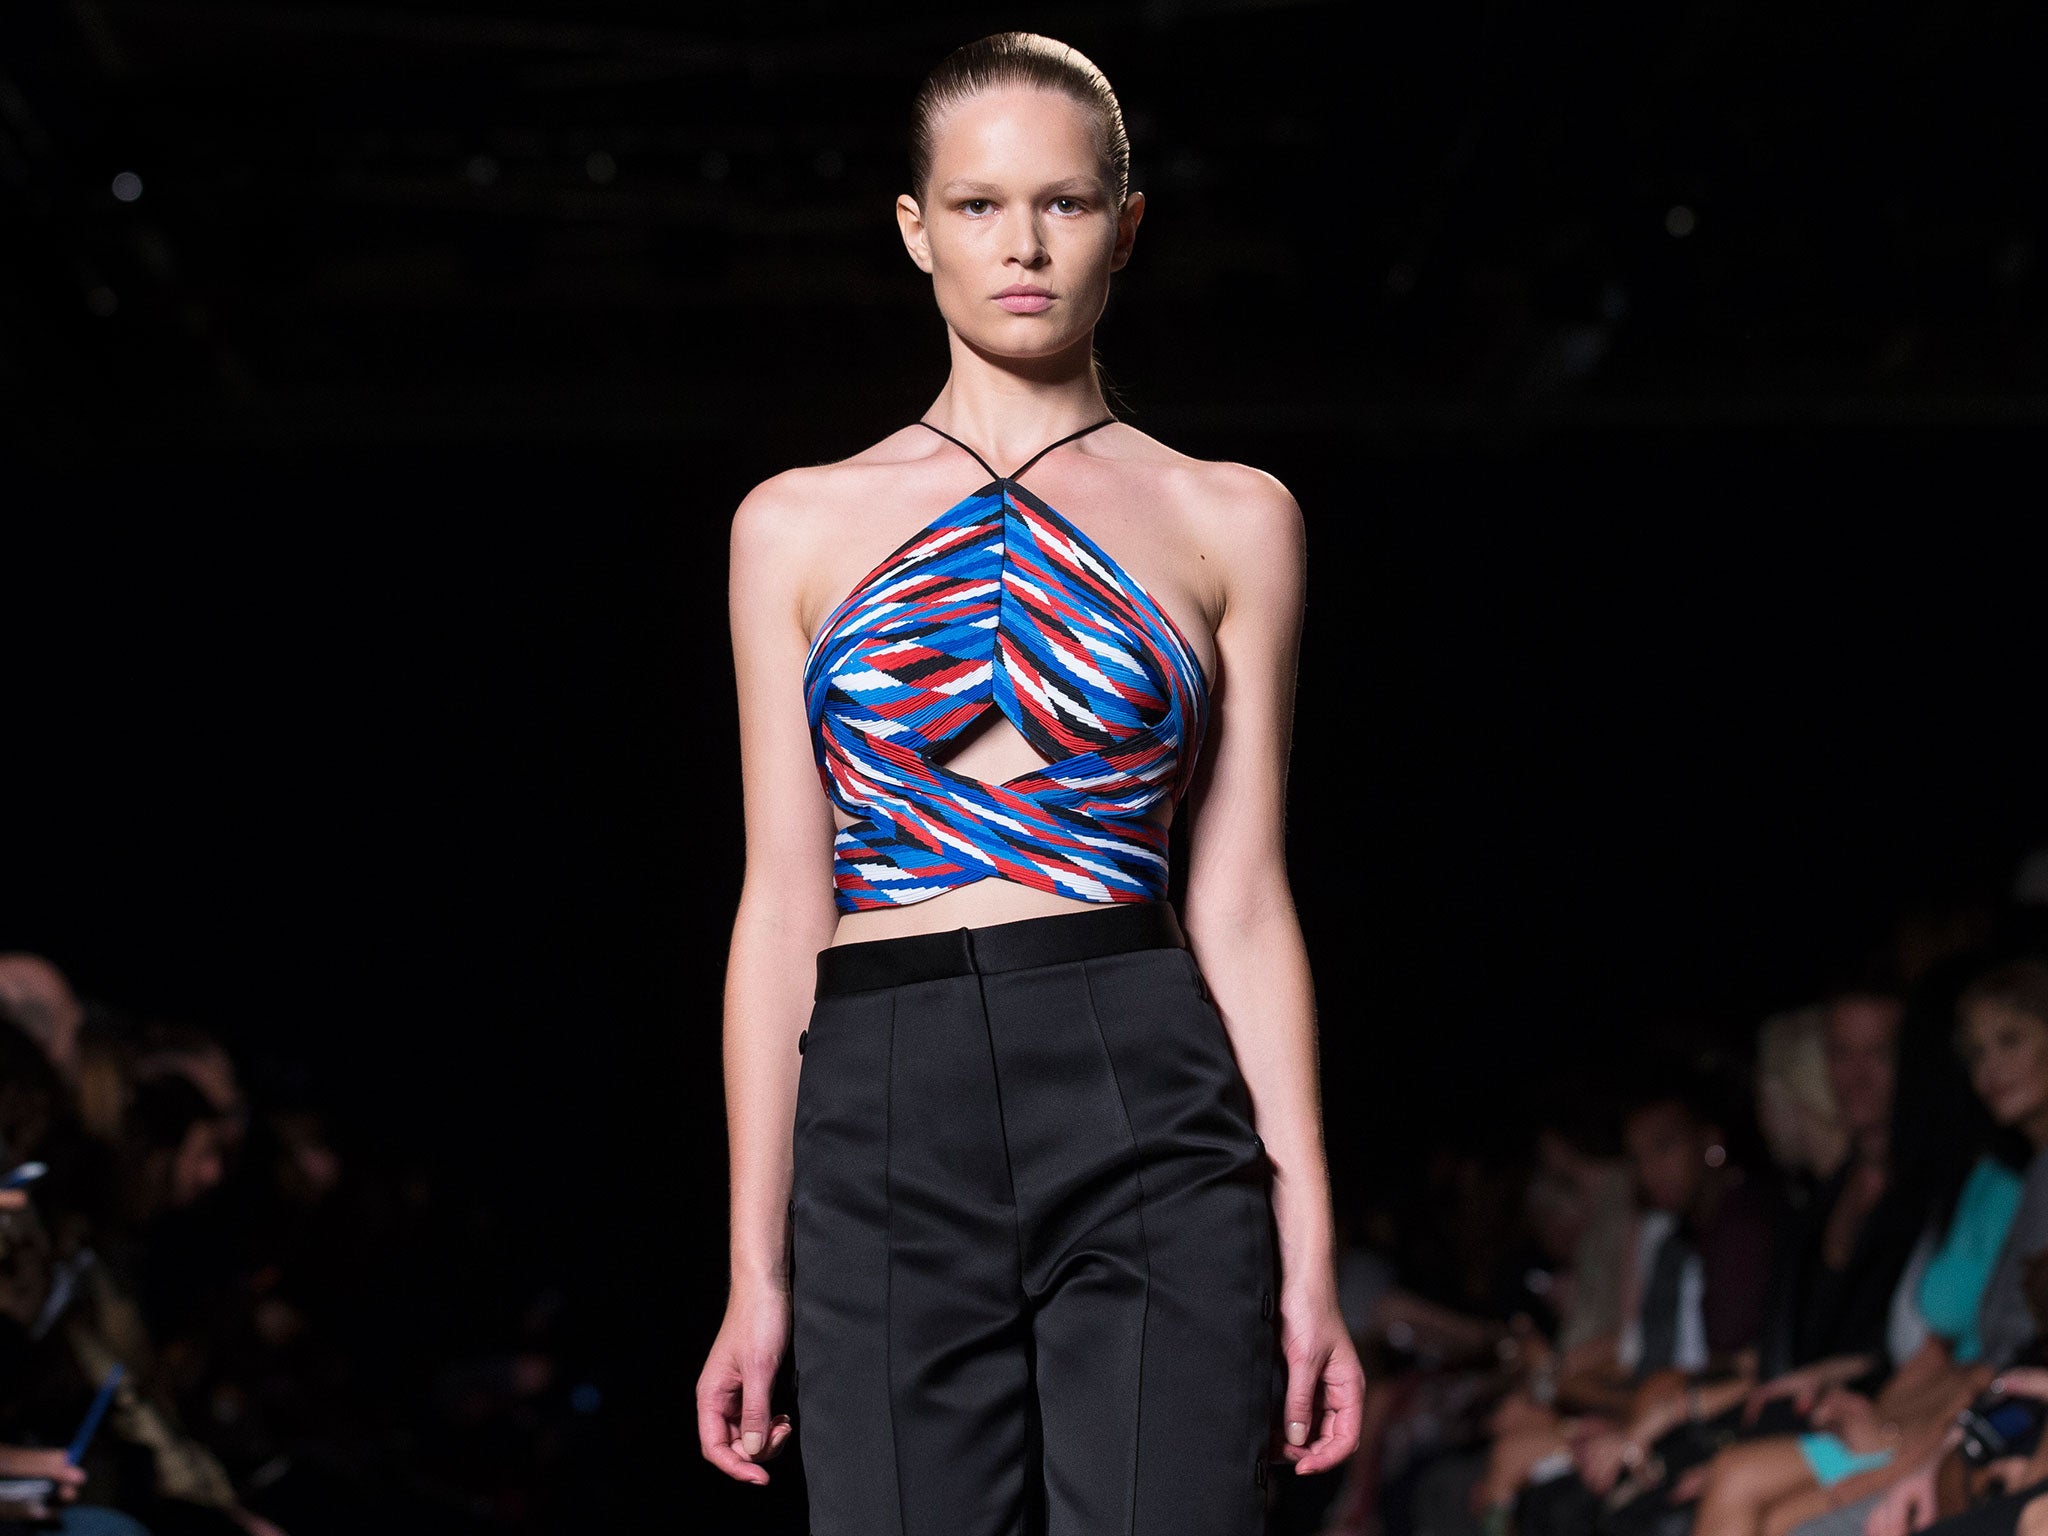 REVIEW: New York Fashion Week 2014 - Alexander Wang | The Independent ...